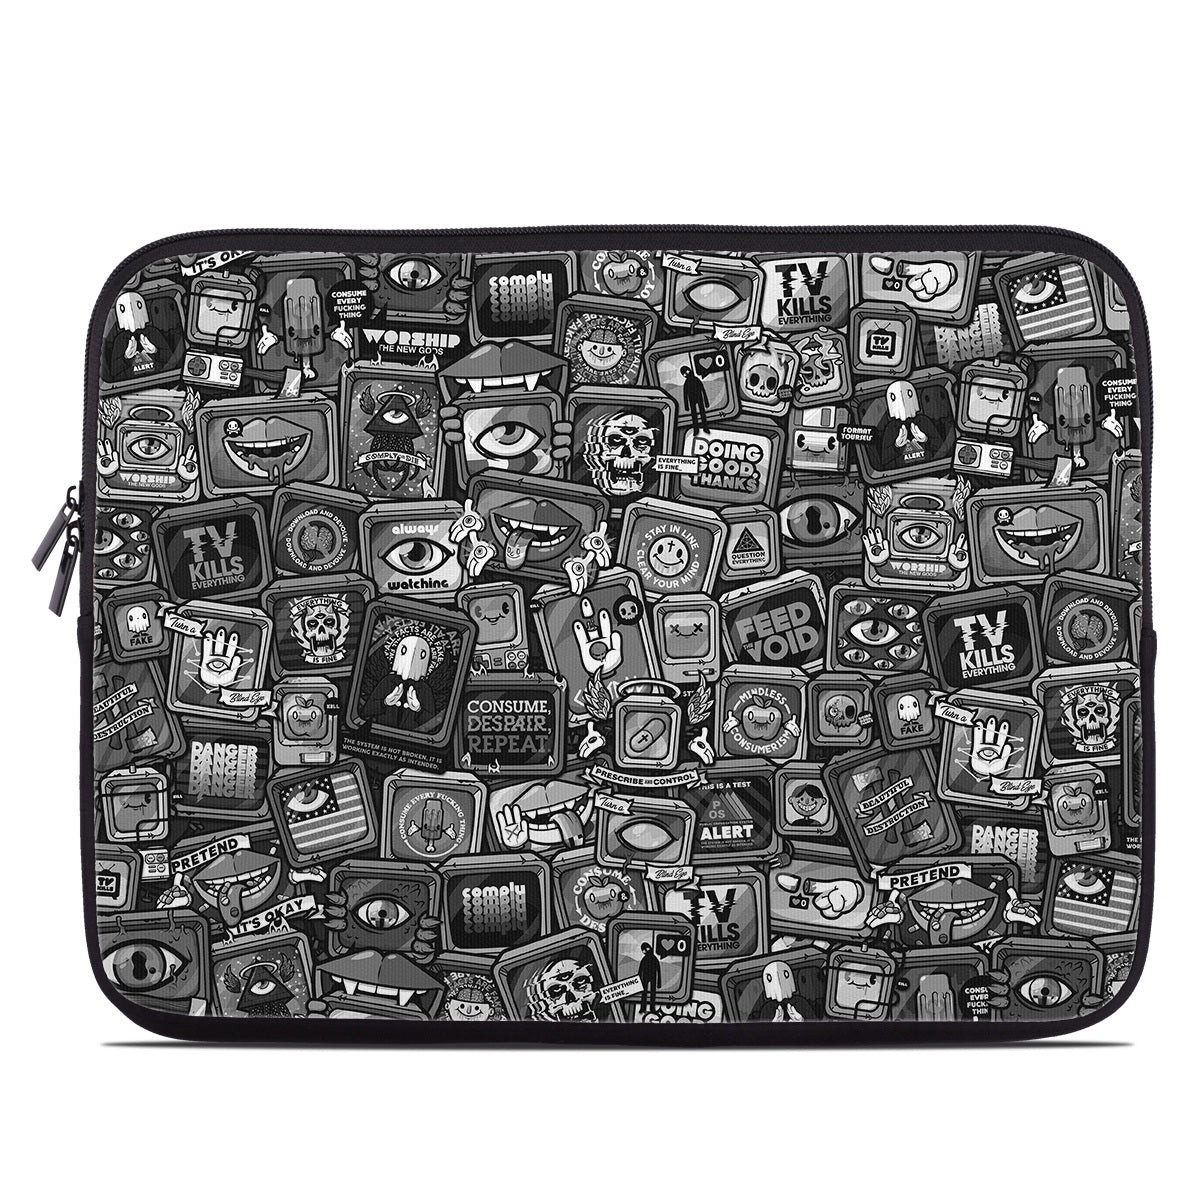 Distraction Tactic B&W - Laptop Sleeve